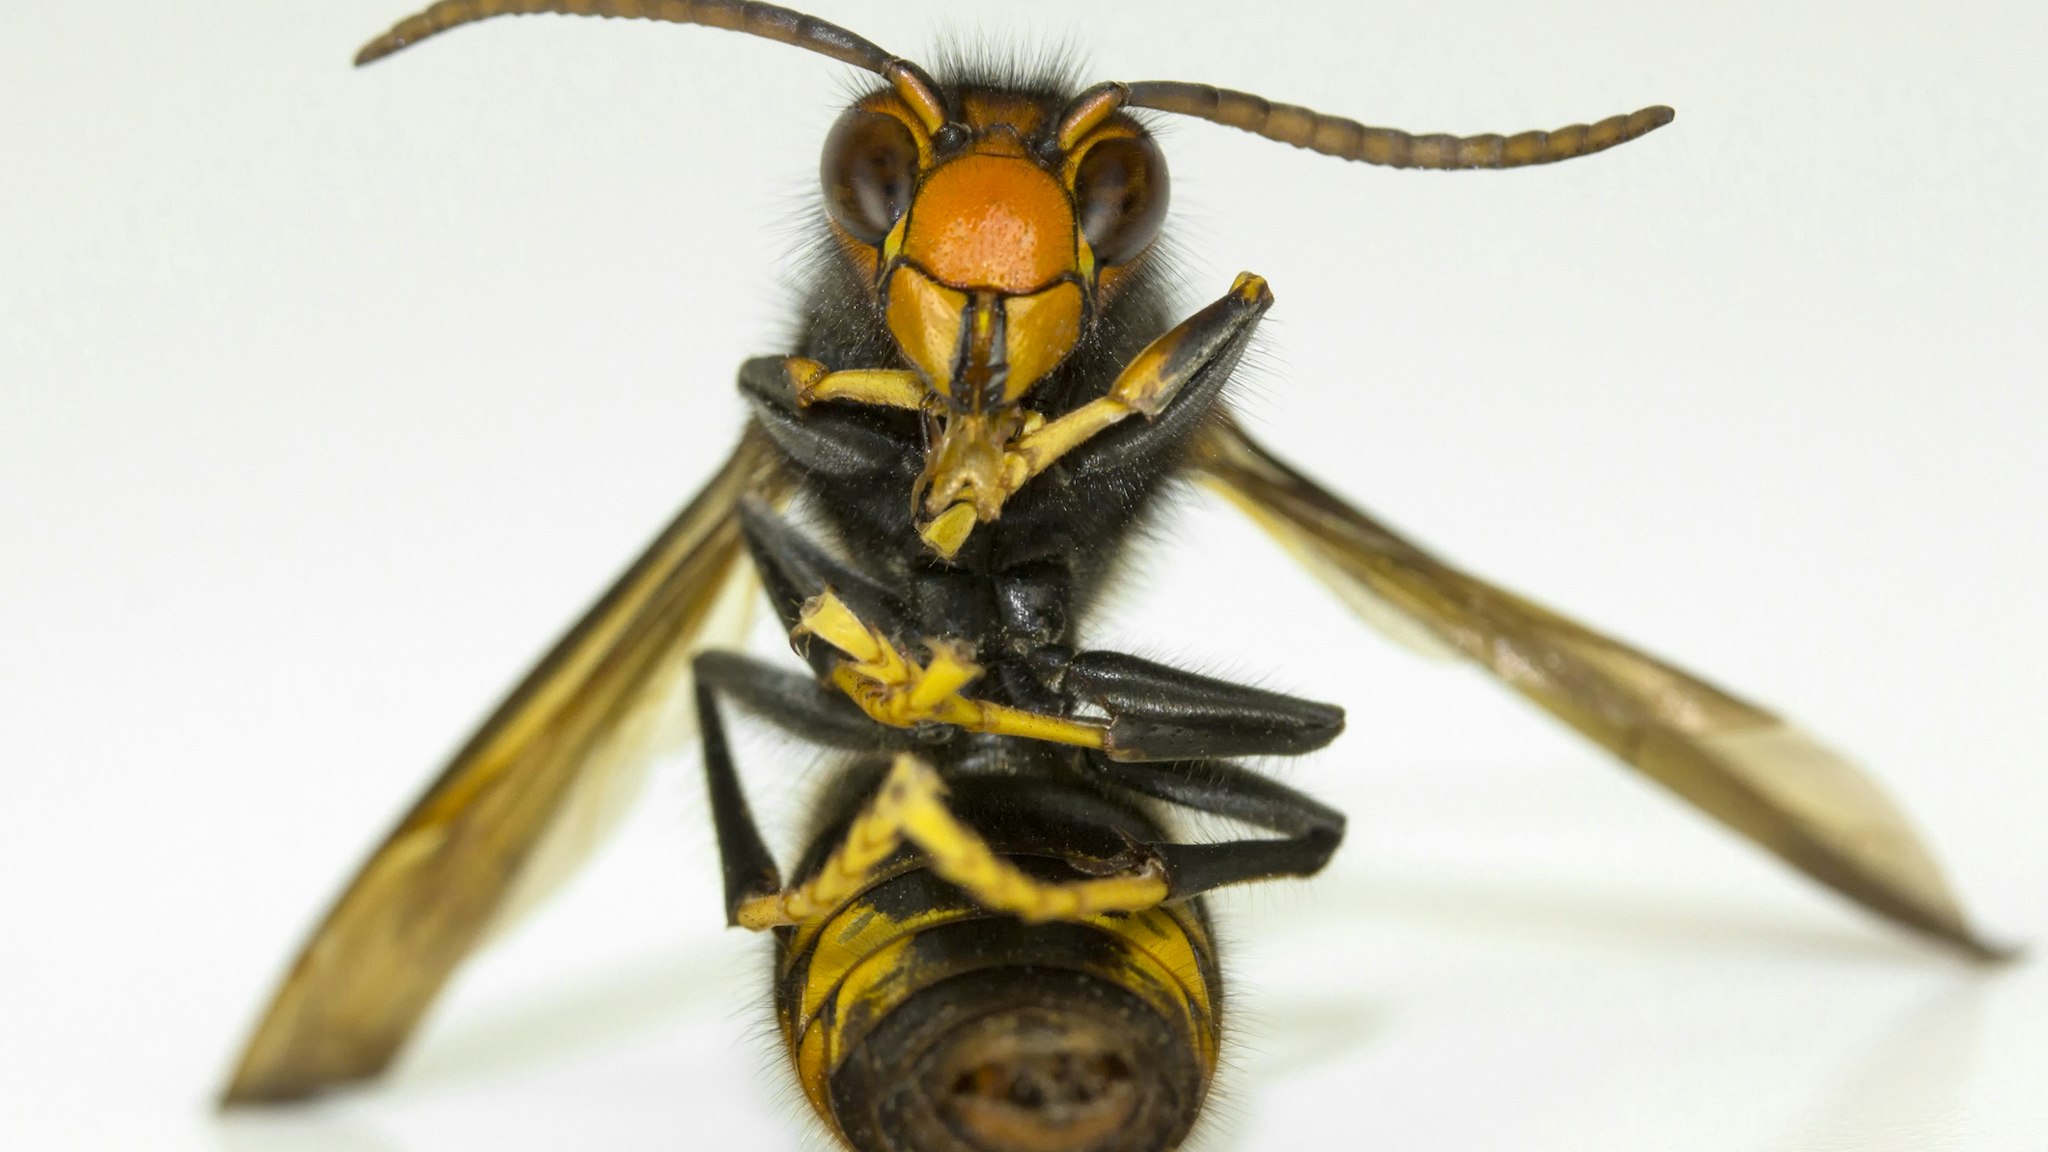 The Asian wasp is a species of wasp of the Vespid family native to Southeast Asia. This wasp, like others of its kind, feeds on insects, but also on bees, although this species is more aggressive than others.